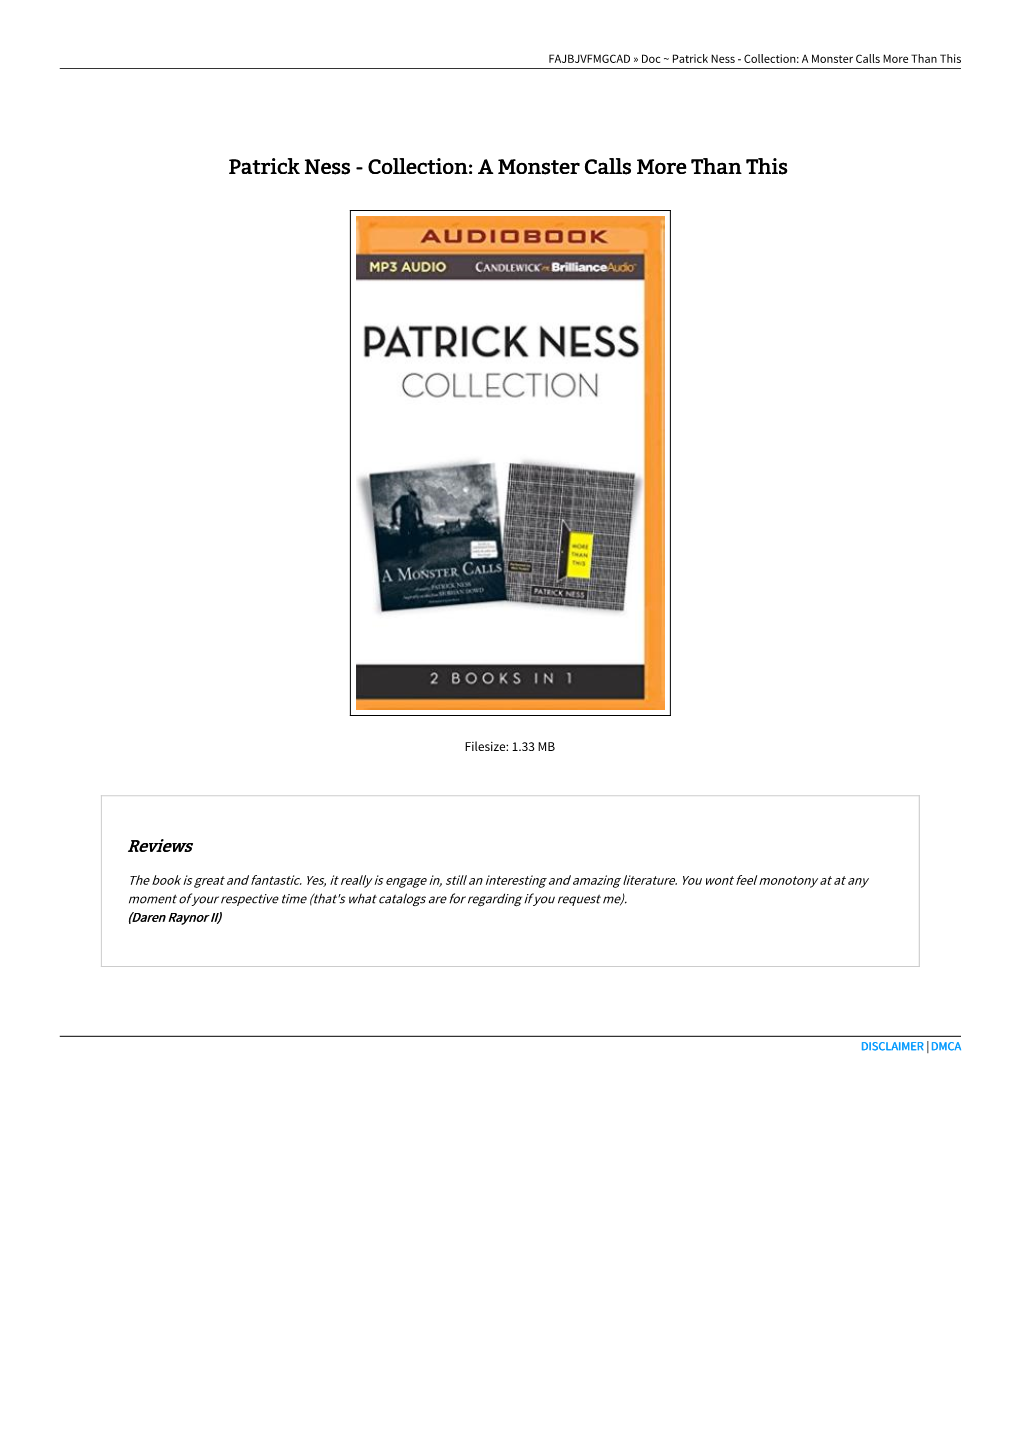 Patrick Ness - Collection: a Monster Calls More Than This